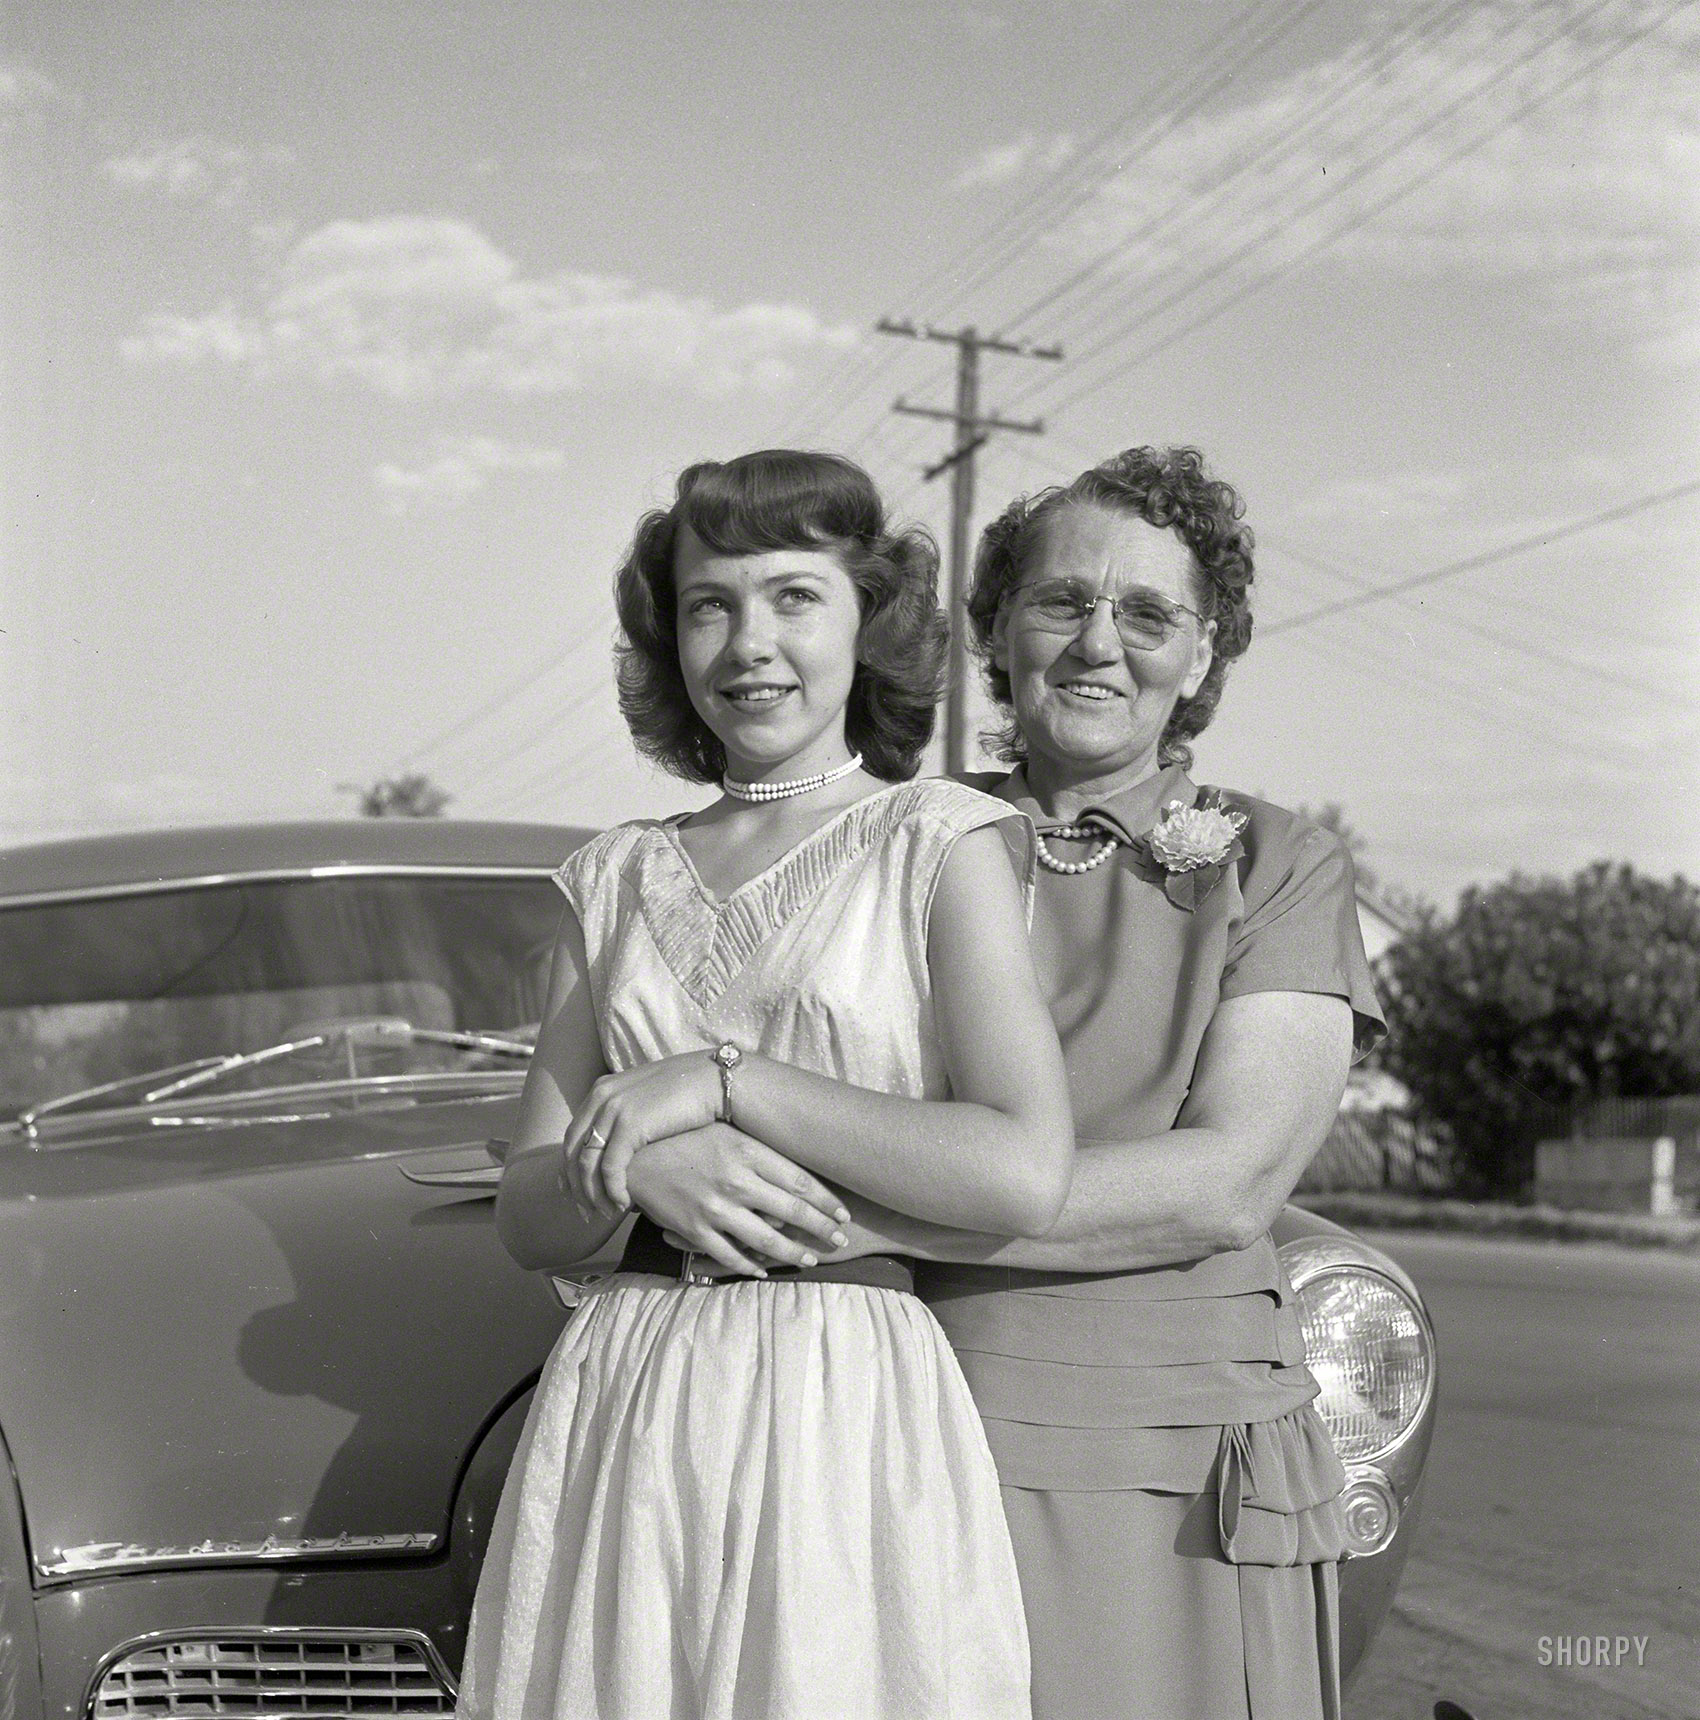 1952. "Photographs show families who migrated to California during the Dust Bowl years. People pictured include Mr. & Mrs. Dinwiddie with daughter Ruth and grandchildren Margaret and Bobby." From photos by Earl Theisen for the Look magazine assignment "What's Become of the Okies?" View full size.